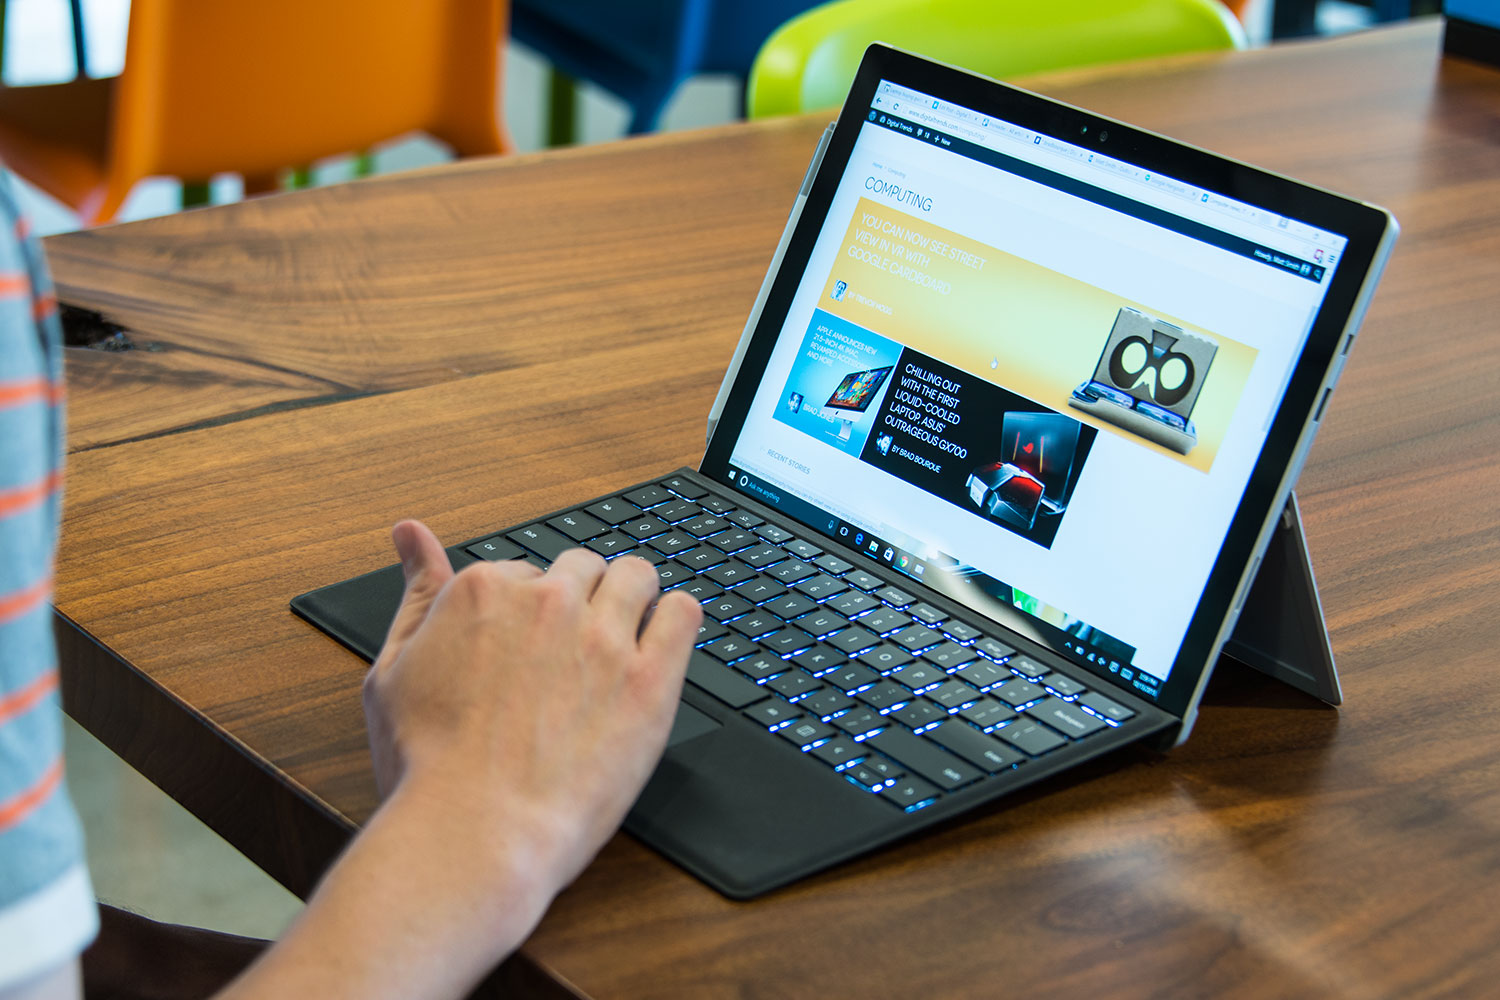 Surface Pro 4 Review: Can You Use it as Your Main Laptop?